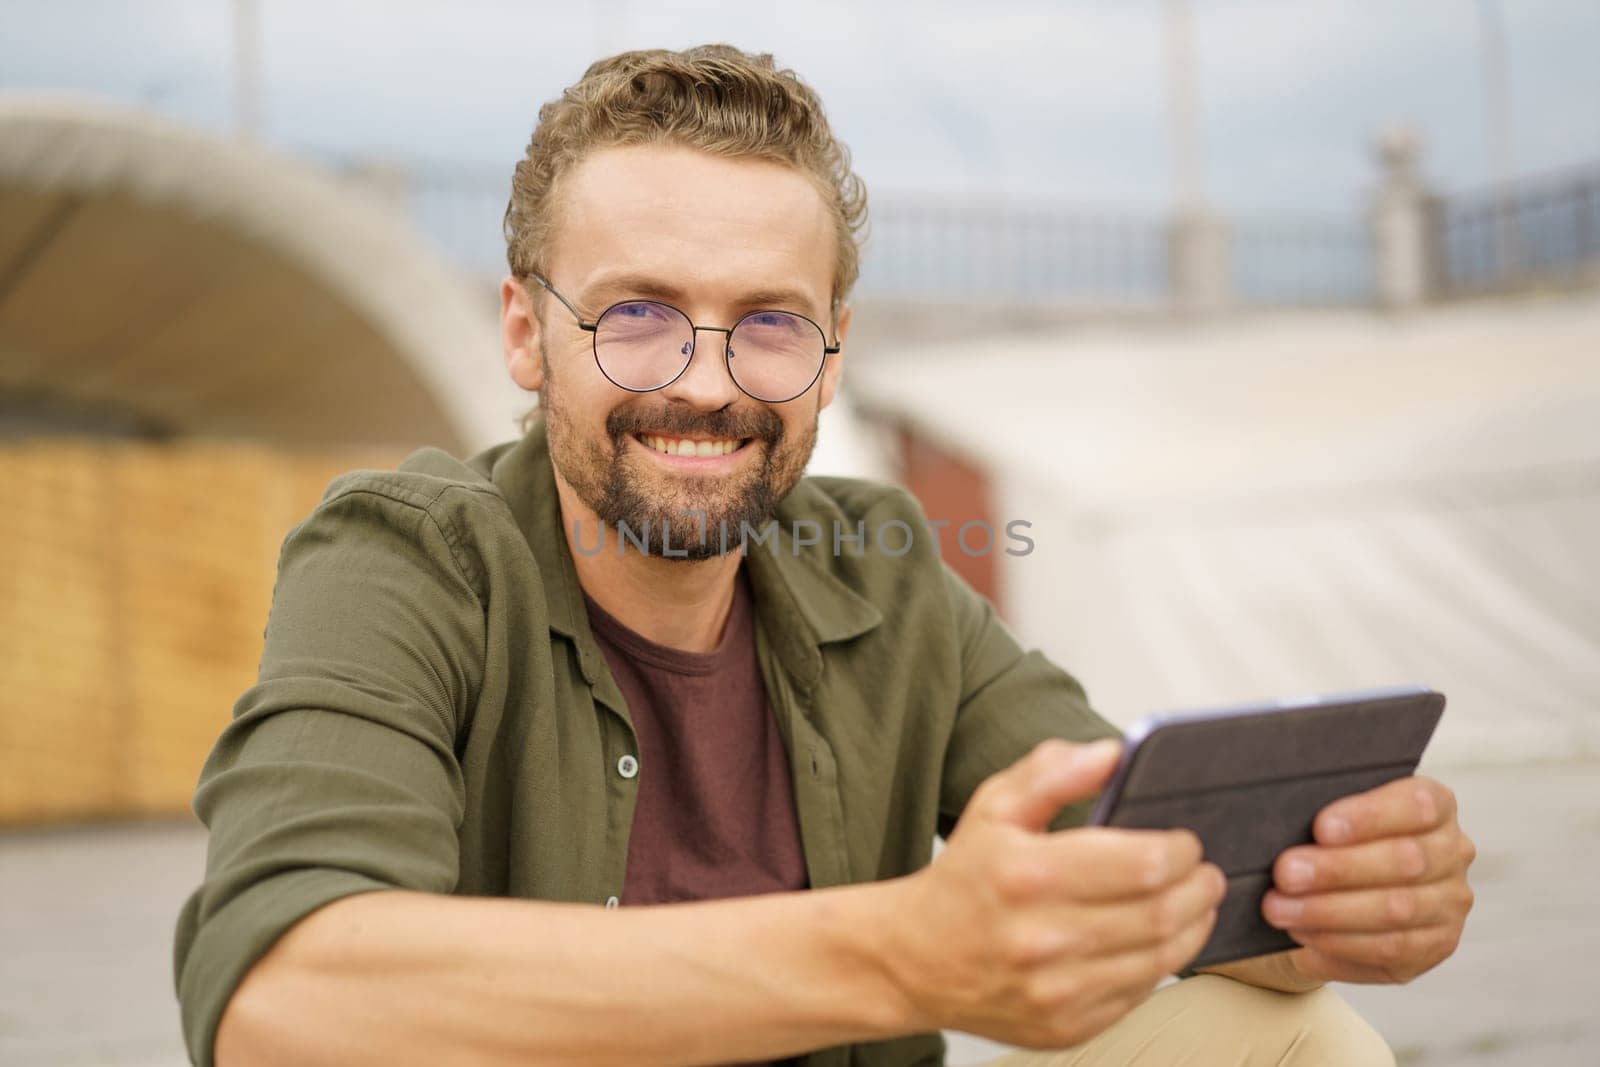 Man sitting on stairs outdoors, wearing charming smile as reads good news. With expression of pure joy and contentment, radiates positivity and happiness. . High quality photo